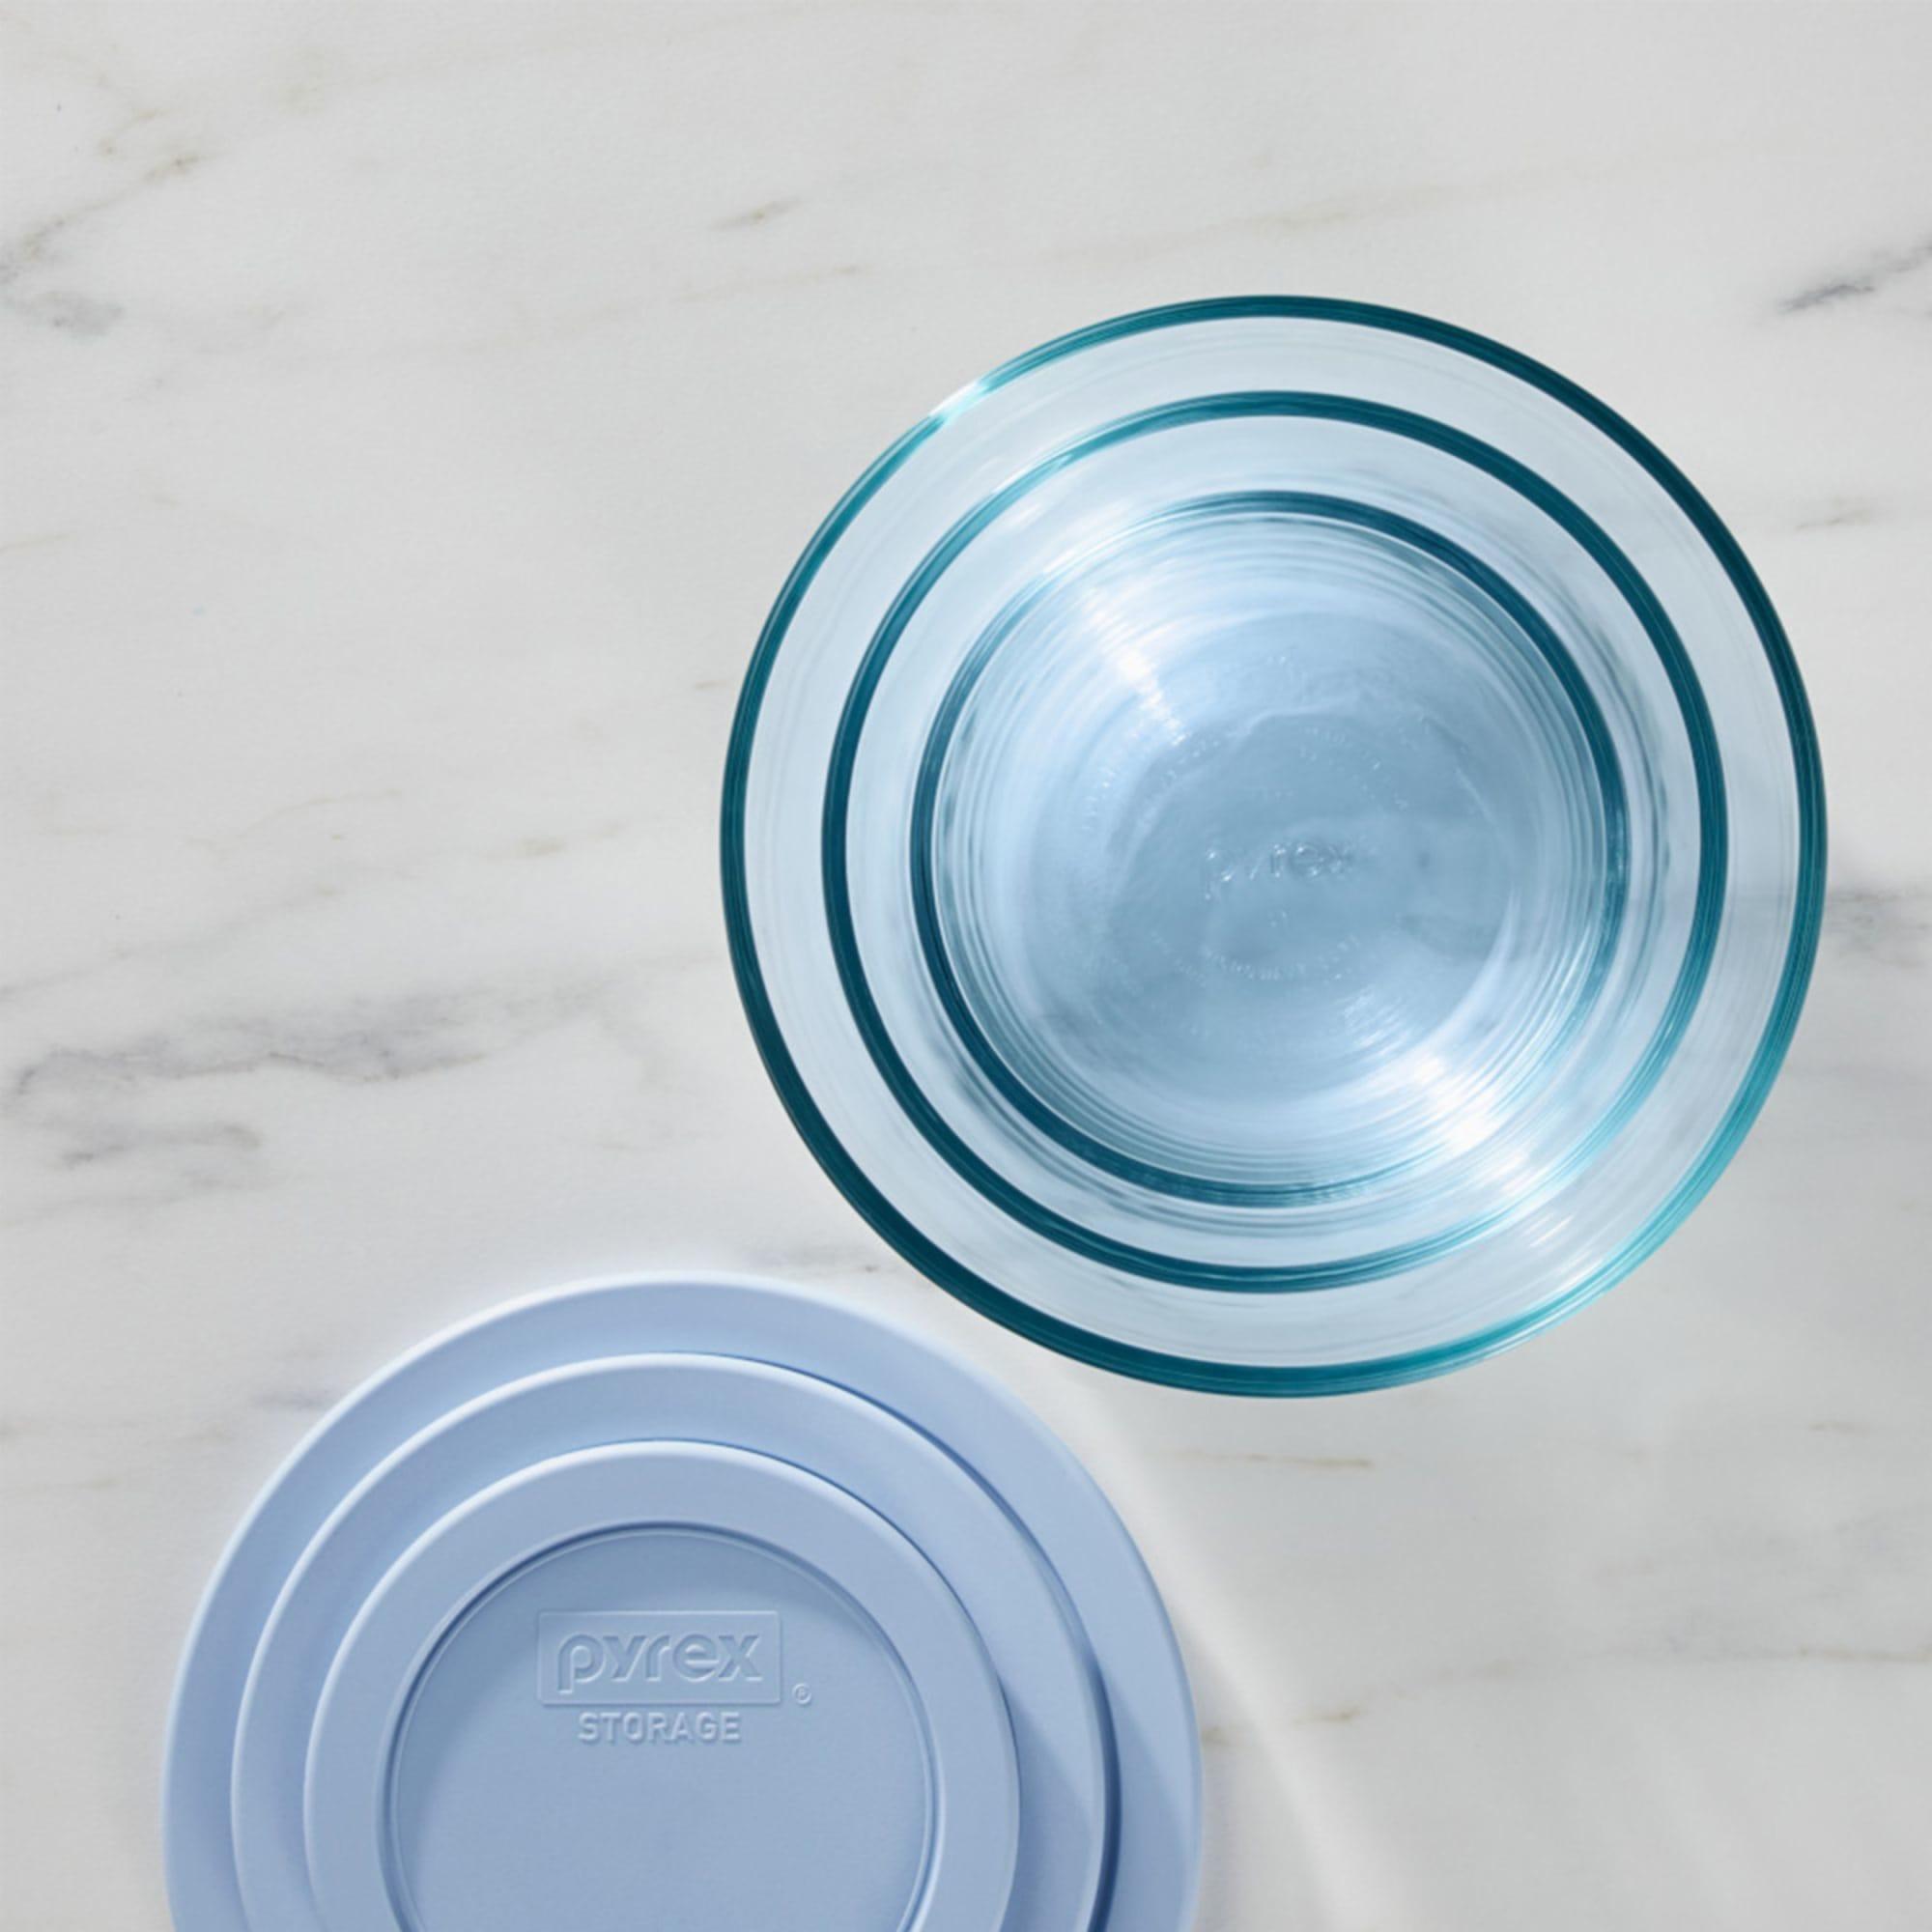 Pyrex Simply Store Round Tinted Glass Storage 4 Cup Blue Image 5